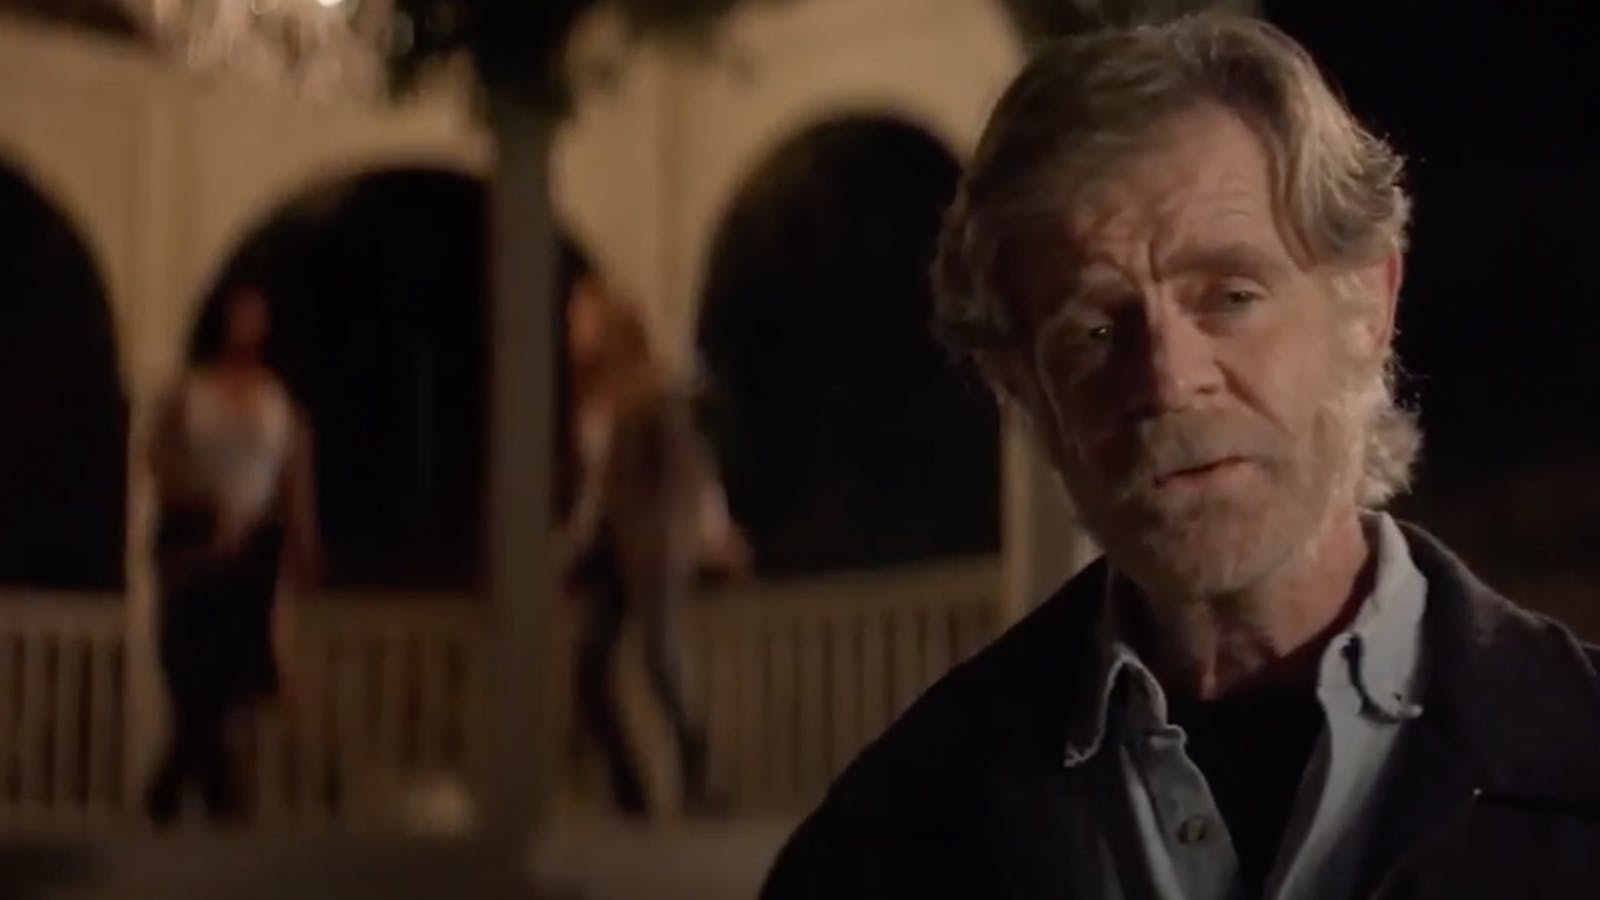 Close-up on actor William H. Macy looking off-camera while two people are blurred in the background. 